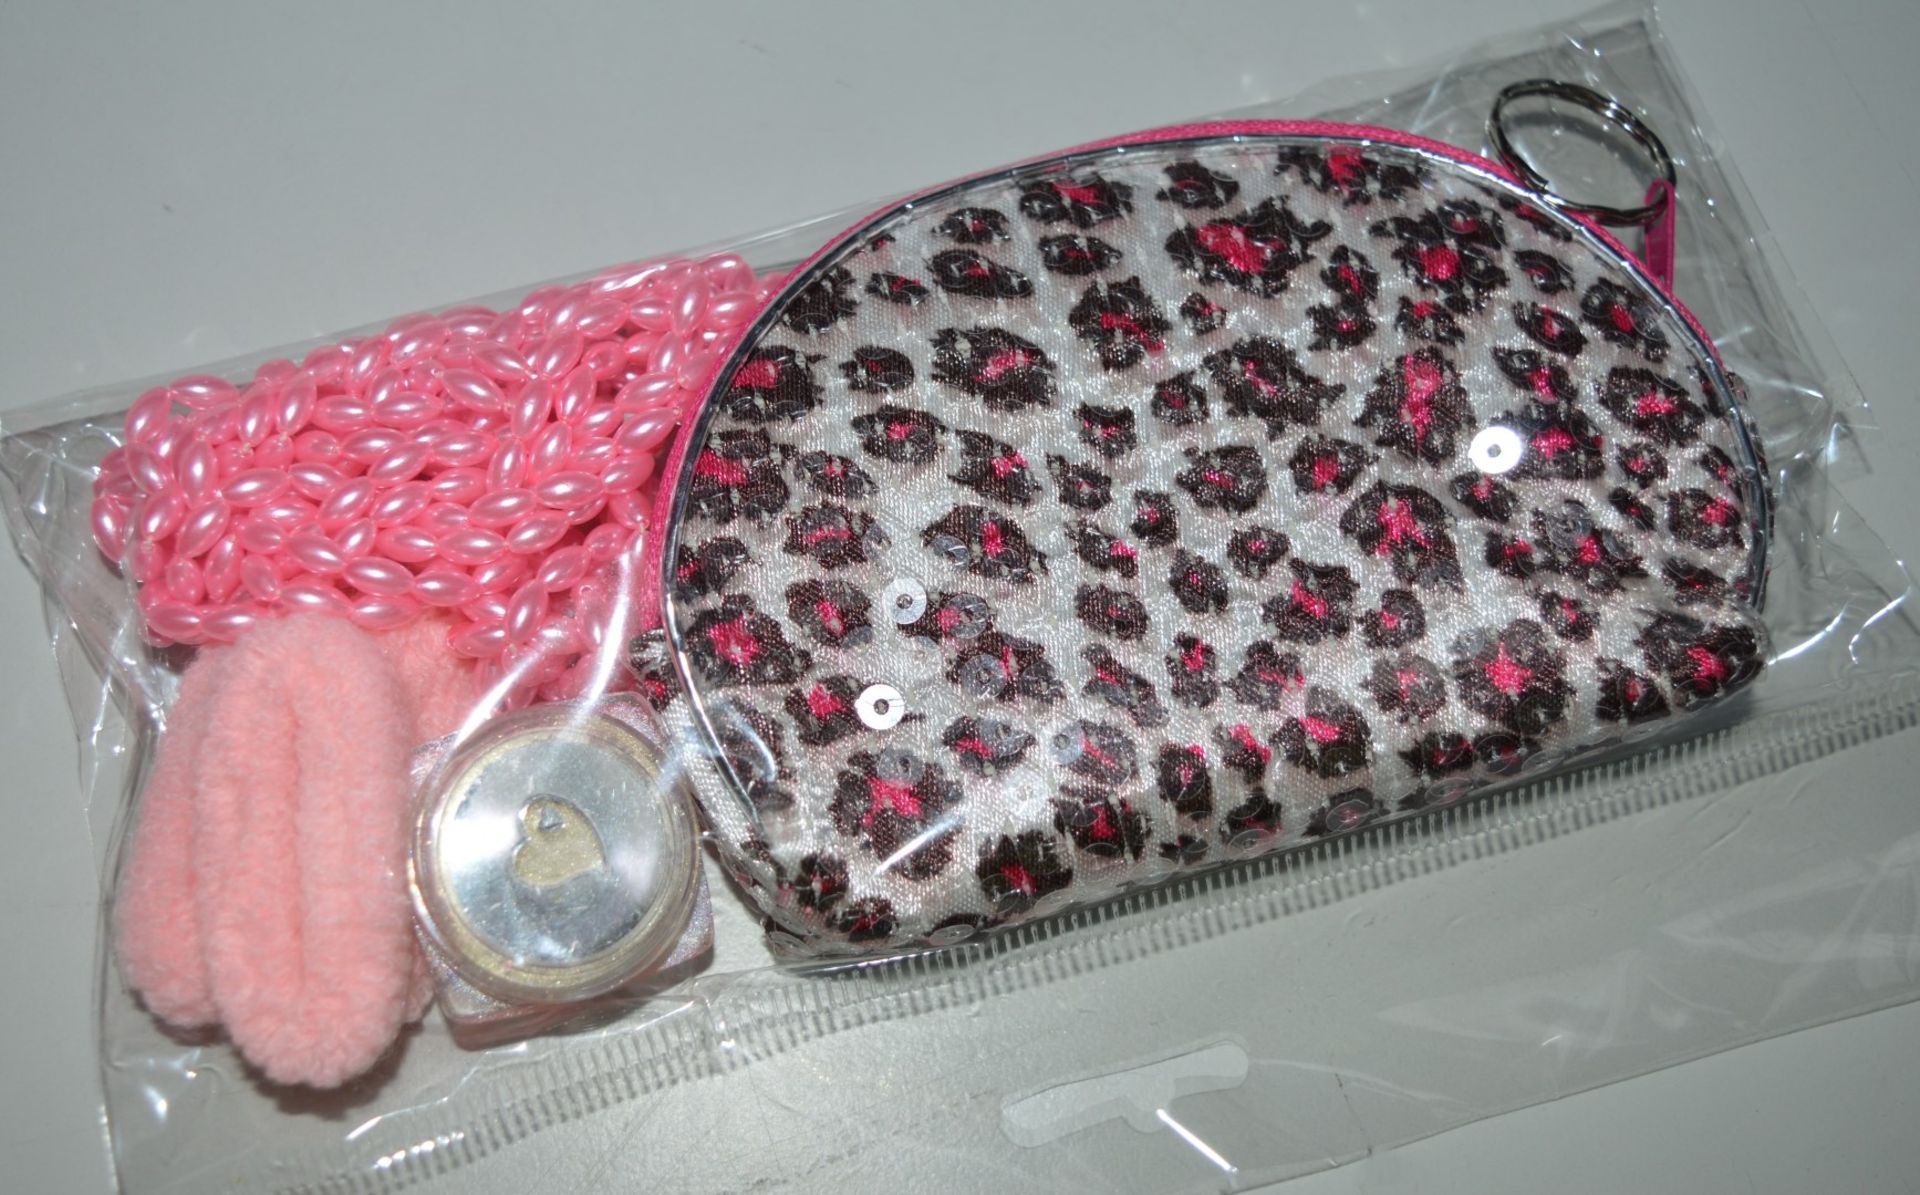 50 x Girls Beauty Gift Sets - Each Set Includes Items Such as a Stylish Purse, Ear Rings, Hair - Image 8 of 14